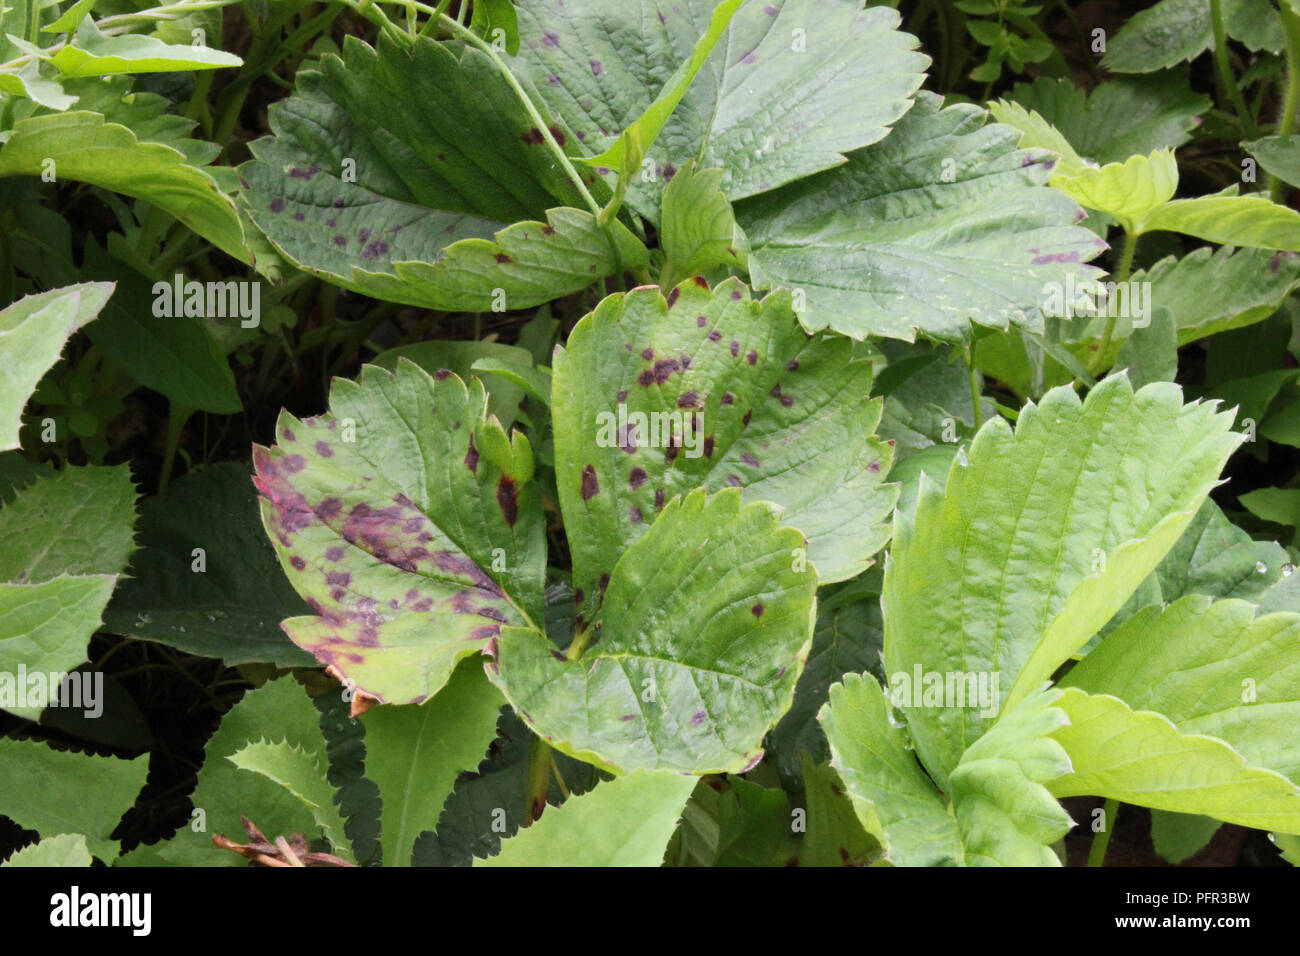 Strawberry leaf spot (purple spots) on leaves of strawberry plant, caused by fungus Mycosphaerella fragariae Stock Photo